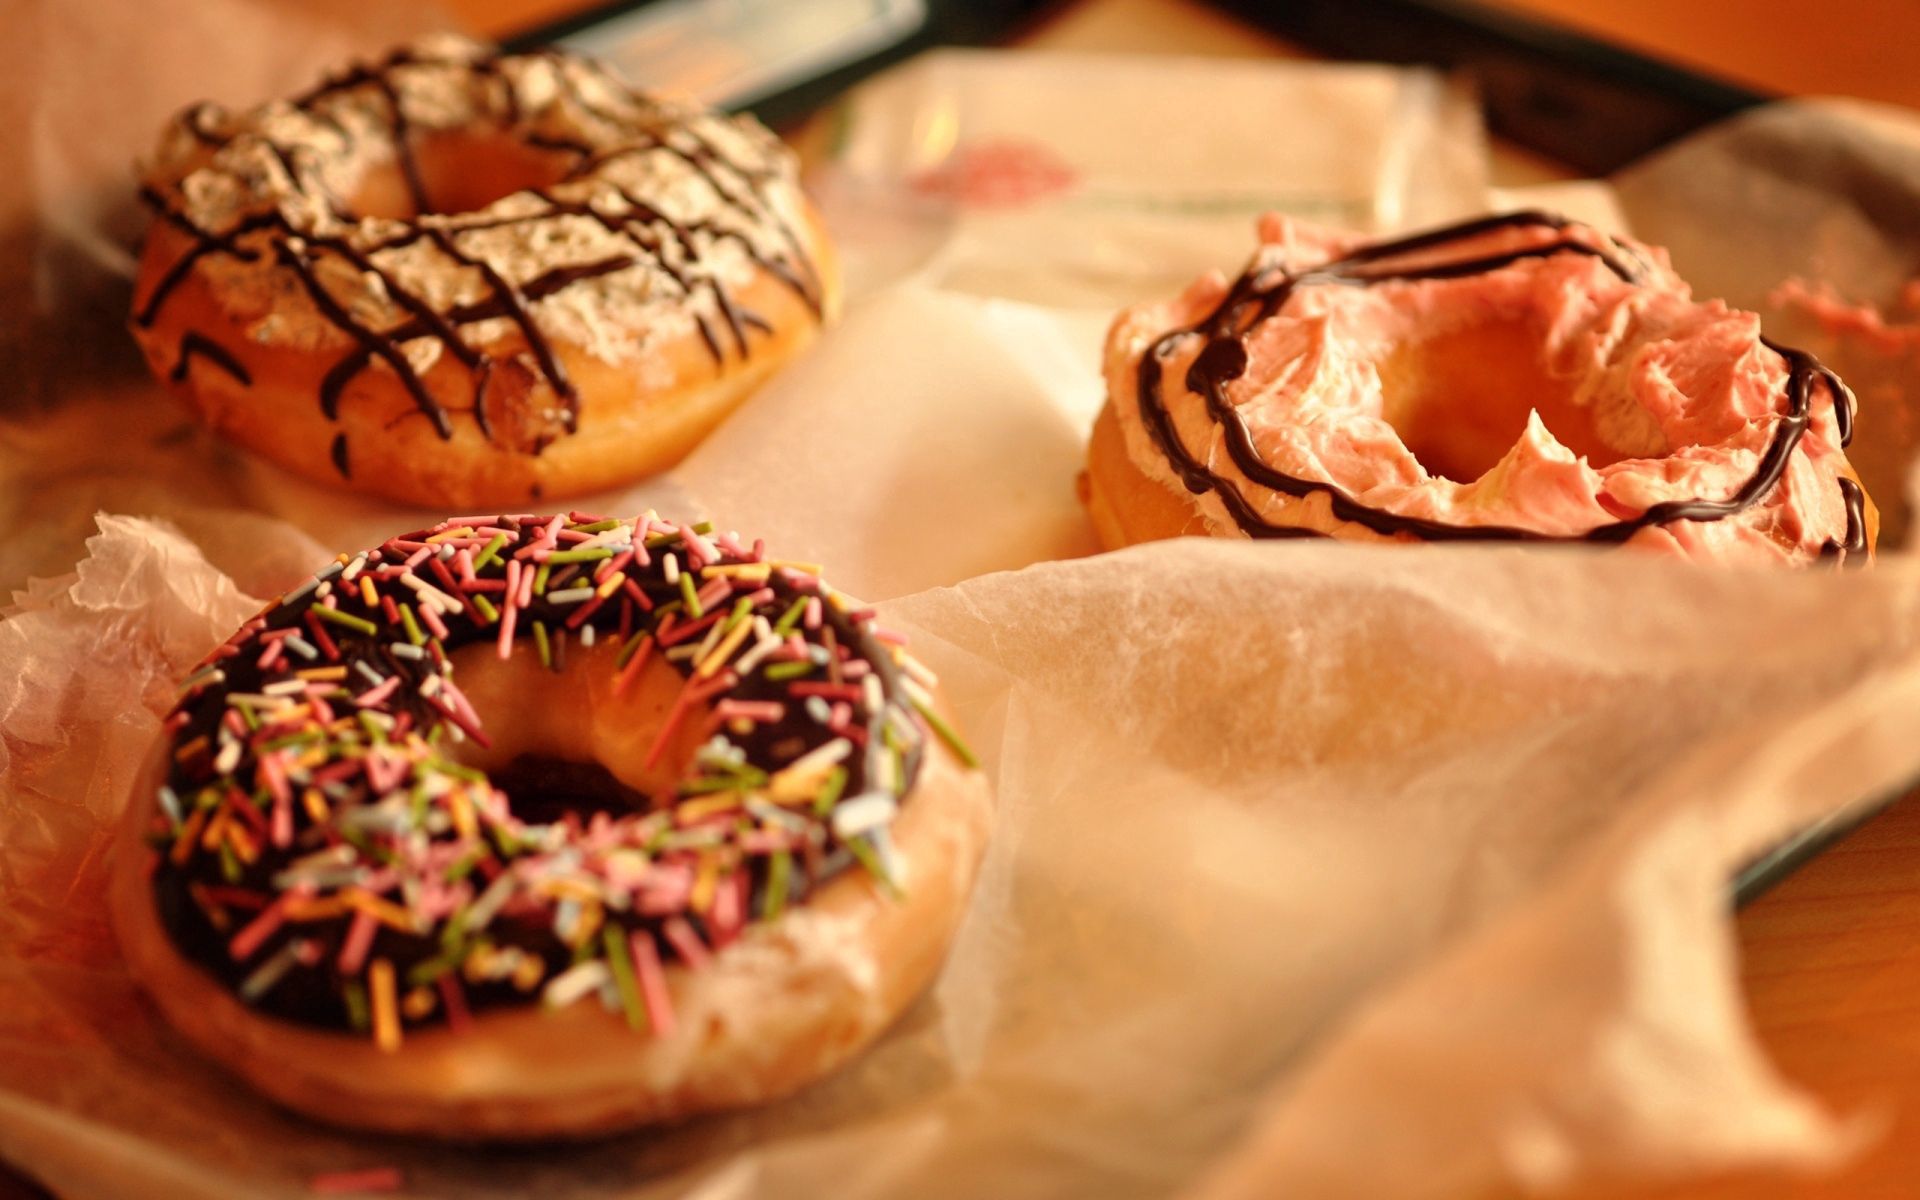 111010 download wallpaper food, sweet, bakery products, baking, donuts, wrapper screensavers and pictures for free